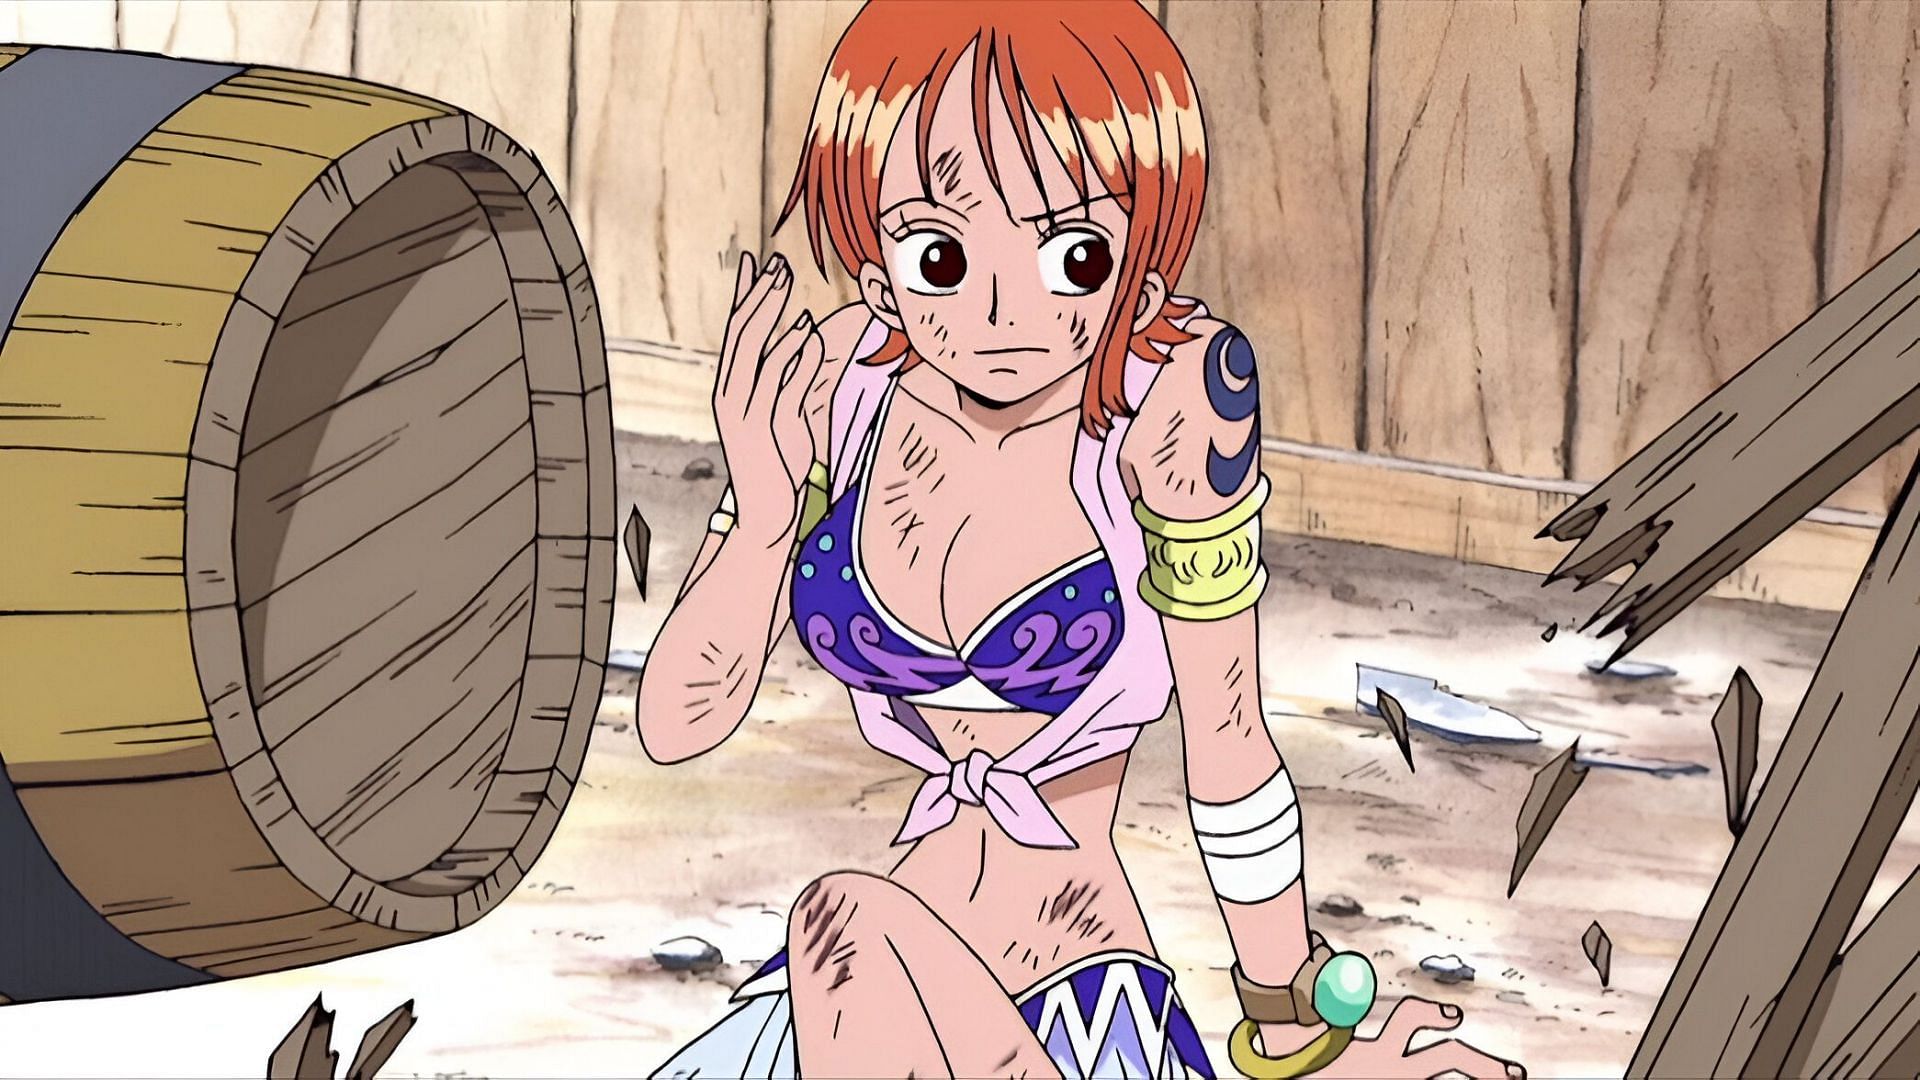 Nami as seen in the anime (Image via Toei Animation)